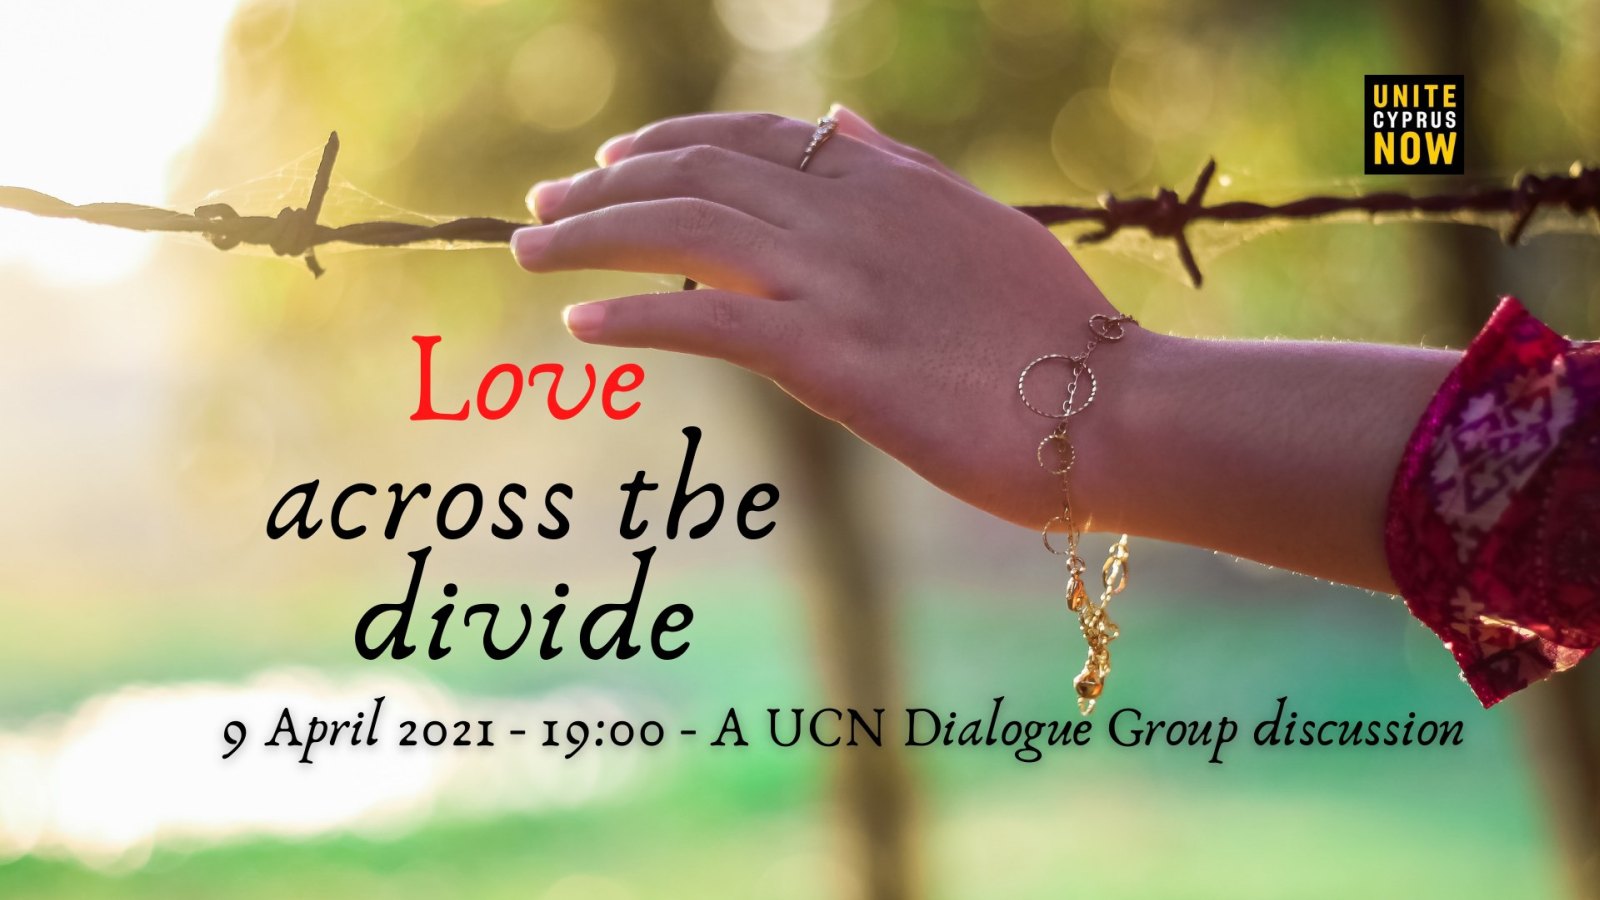 UCN dialogue groups love across the divide